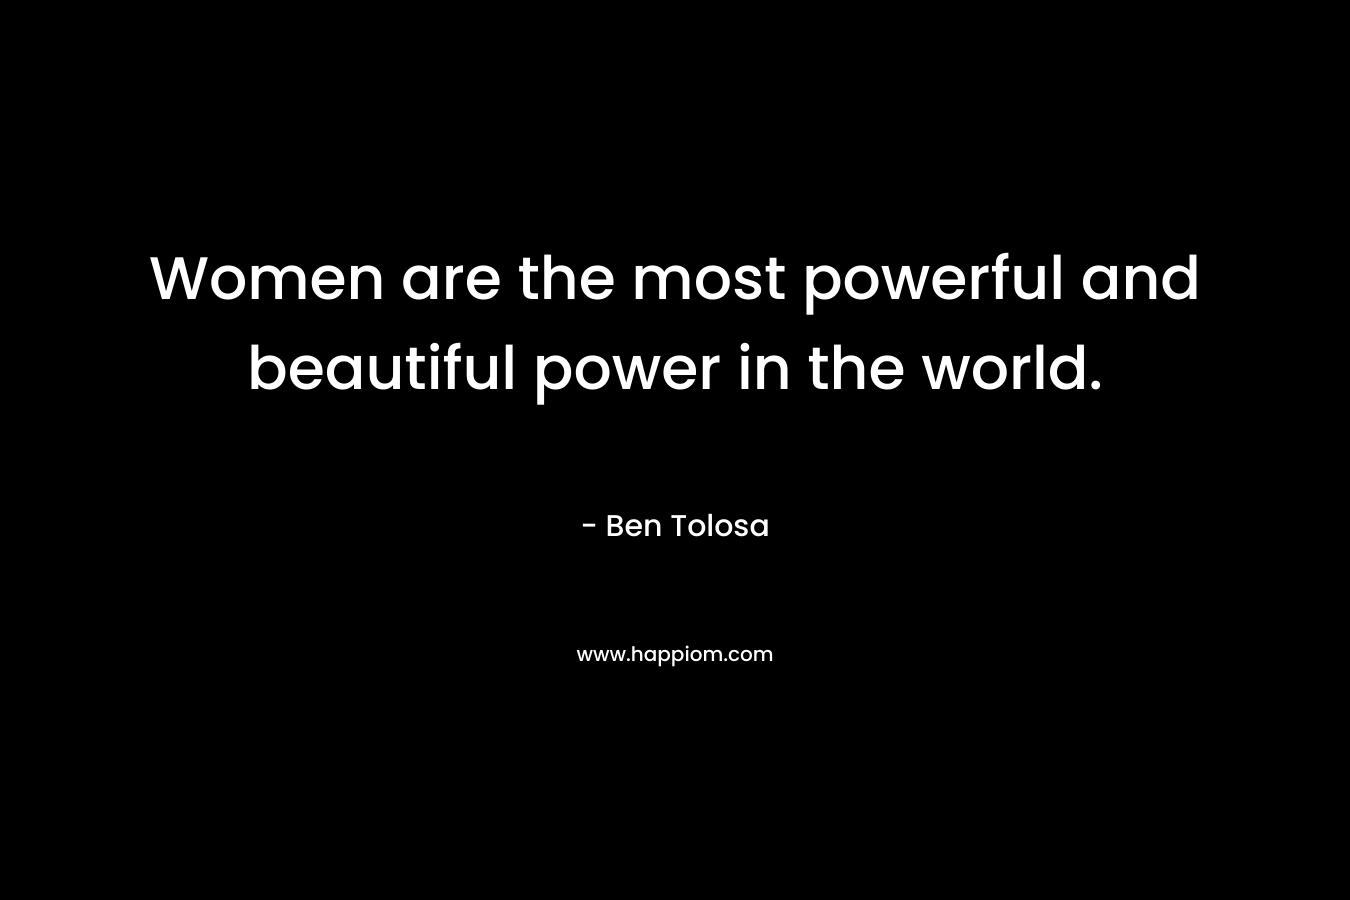 Women are the most powerful and beautiful power in the world.